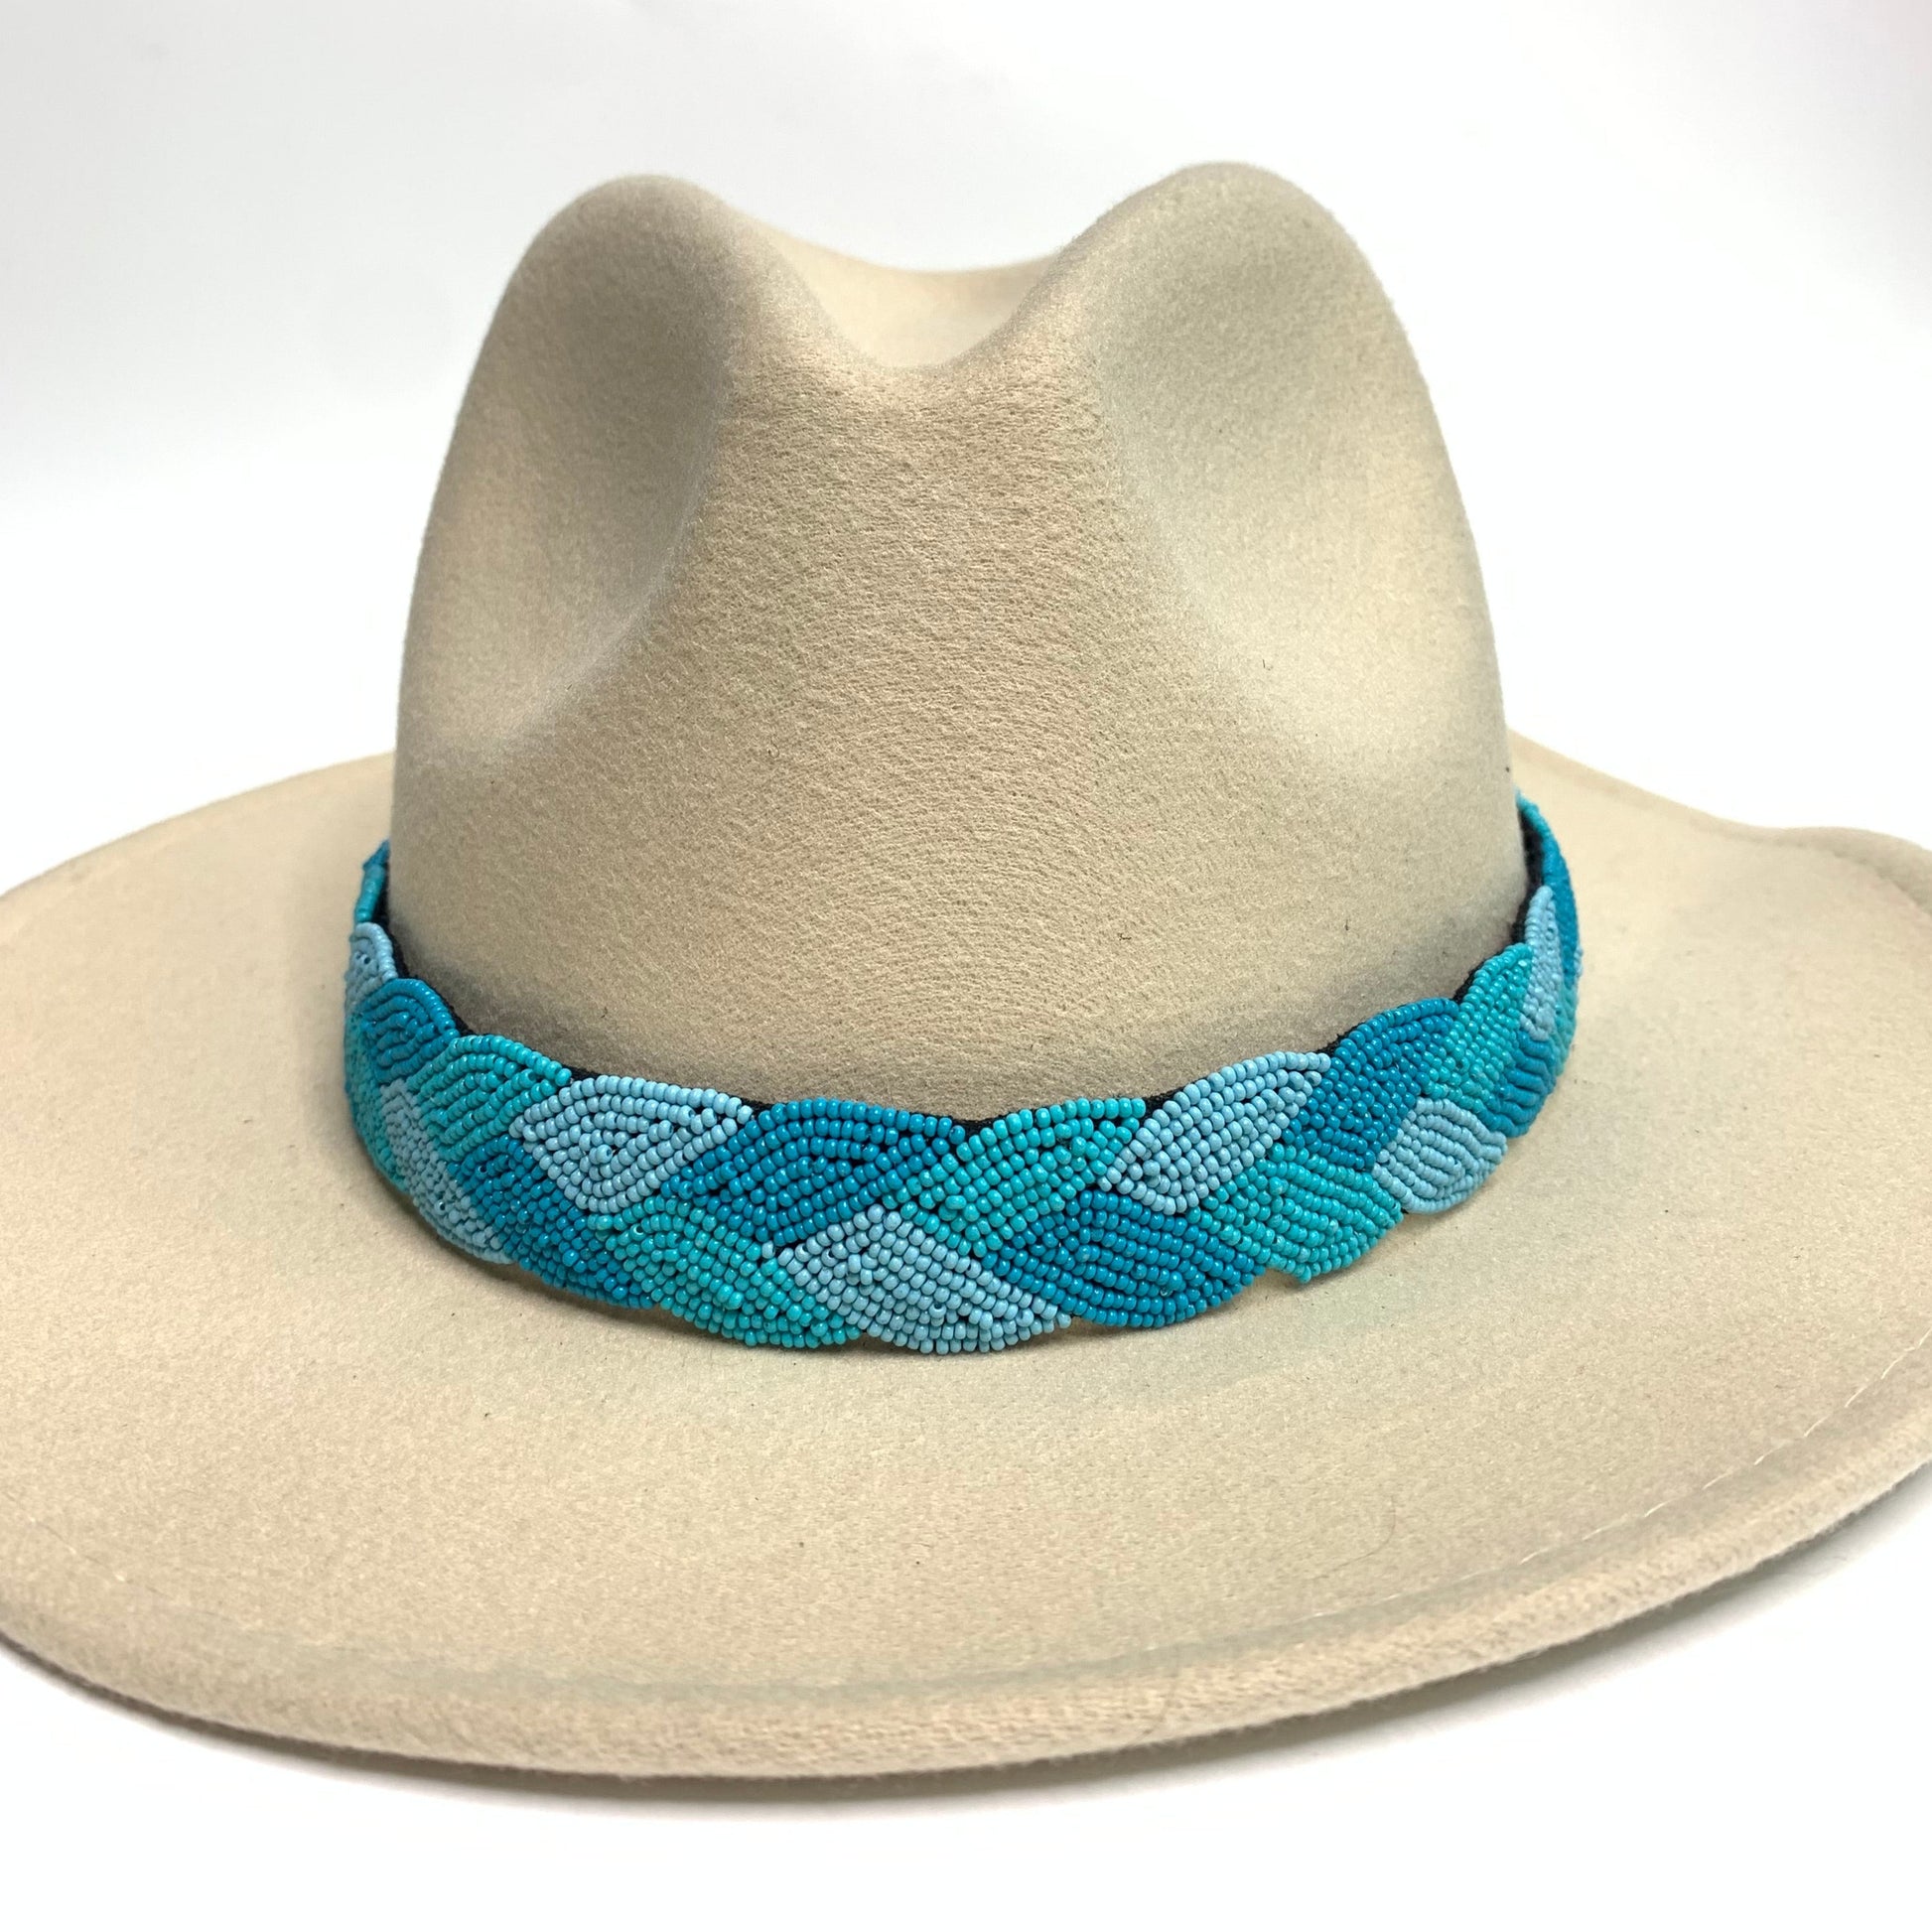 adjustable beaded hatband with three varying shades of turquoise